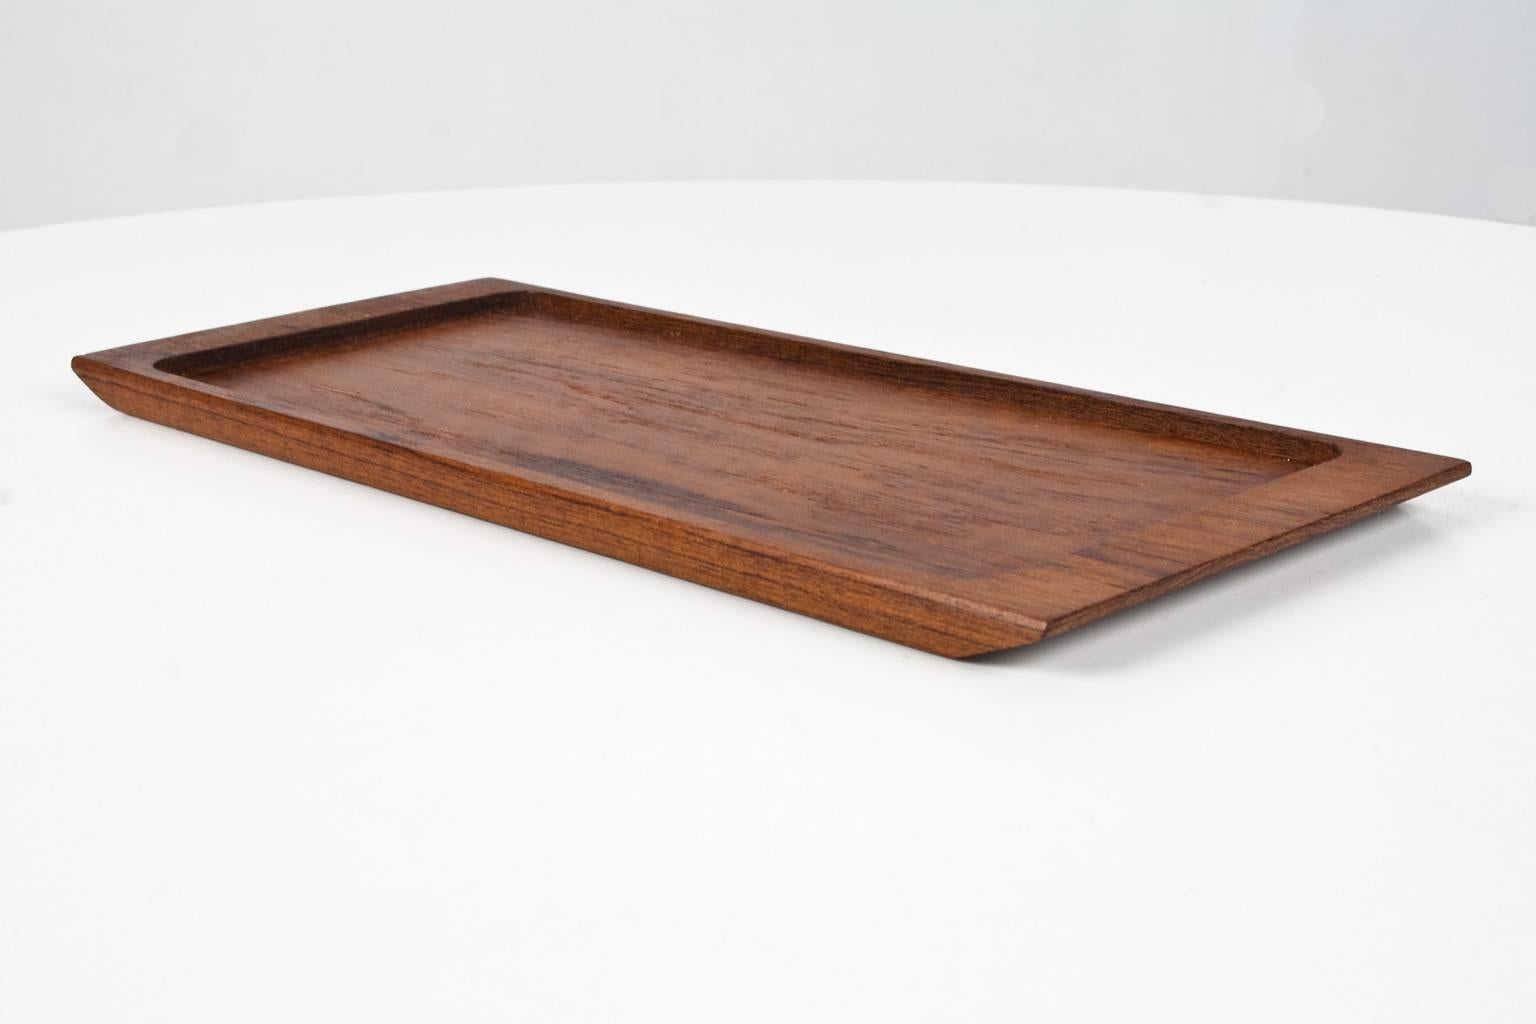 Oiled 1960s Midcentury Danish Solid Wooden Teak Desk Accessory or Table Tray For Sale